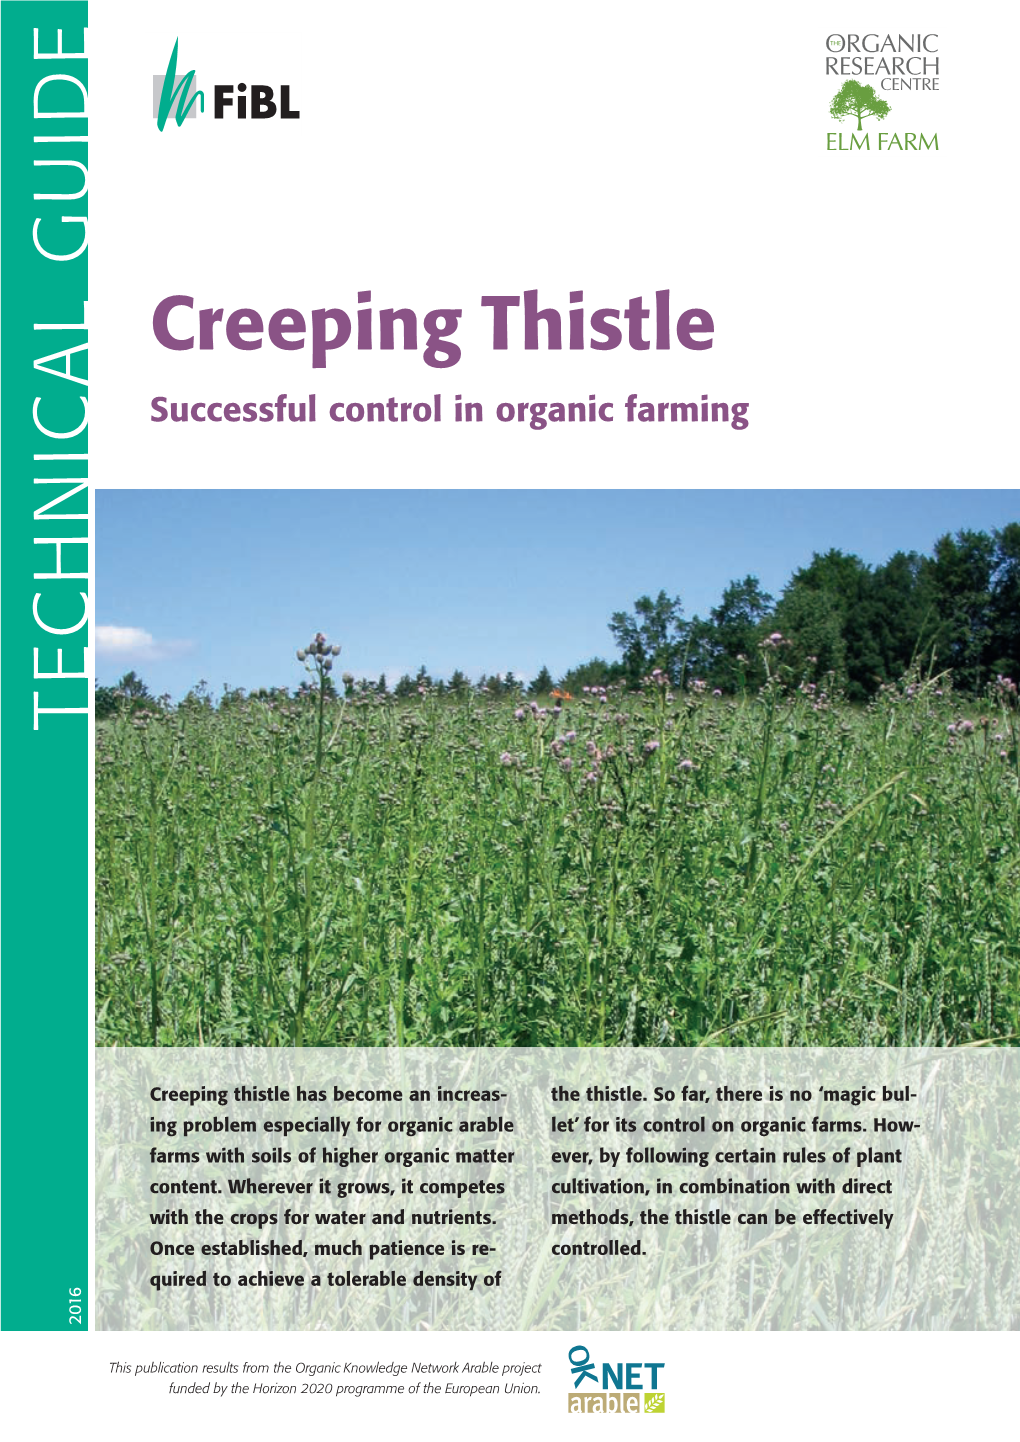 Creeping Thistle Inorganicfarming Successful Control Creeping Thistle Funded by the Horizon 2020 Programme of the European Union